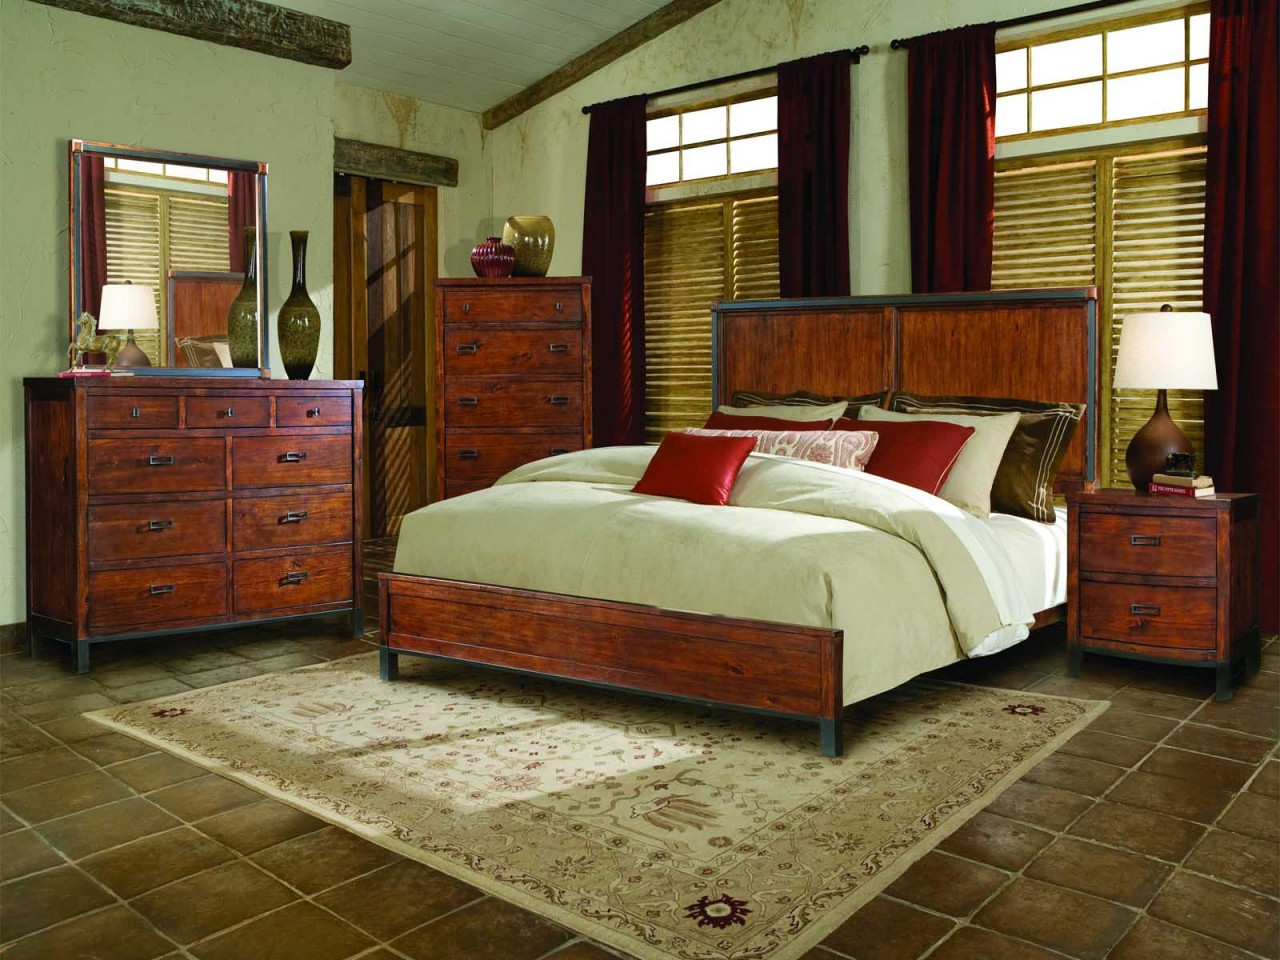 Rustic Shabby Chic Bedroom
 Breathtaking Rustic Bedroom Furniture Sets with Warm